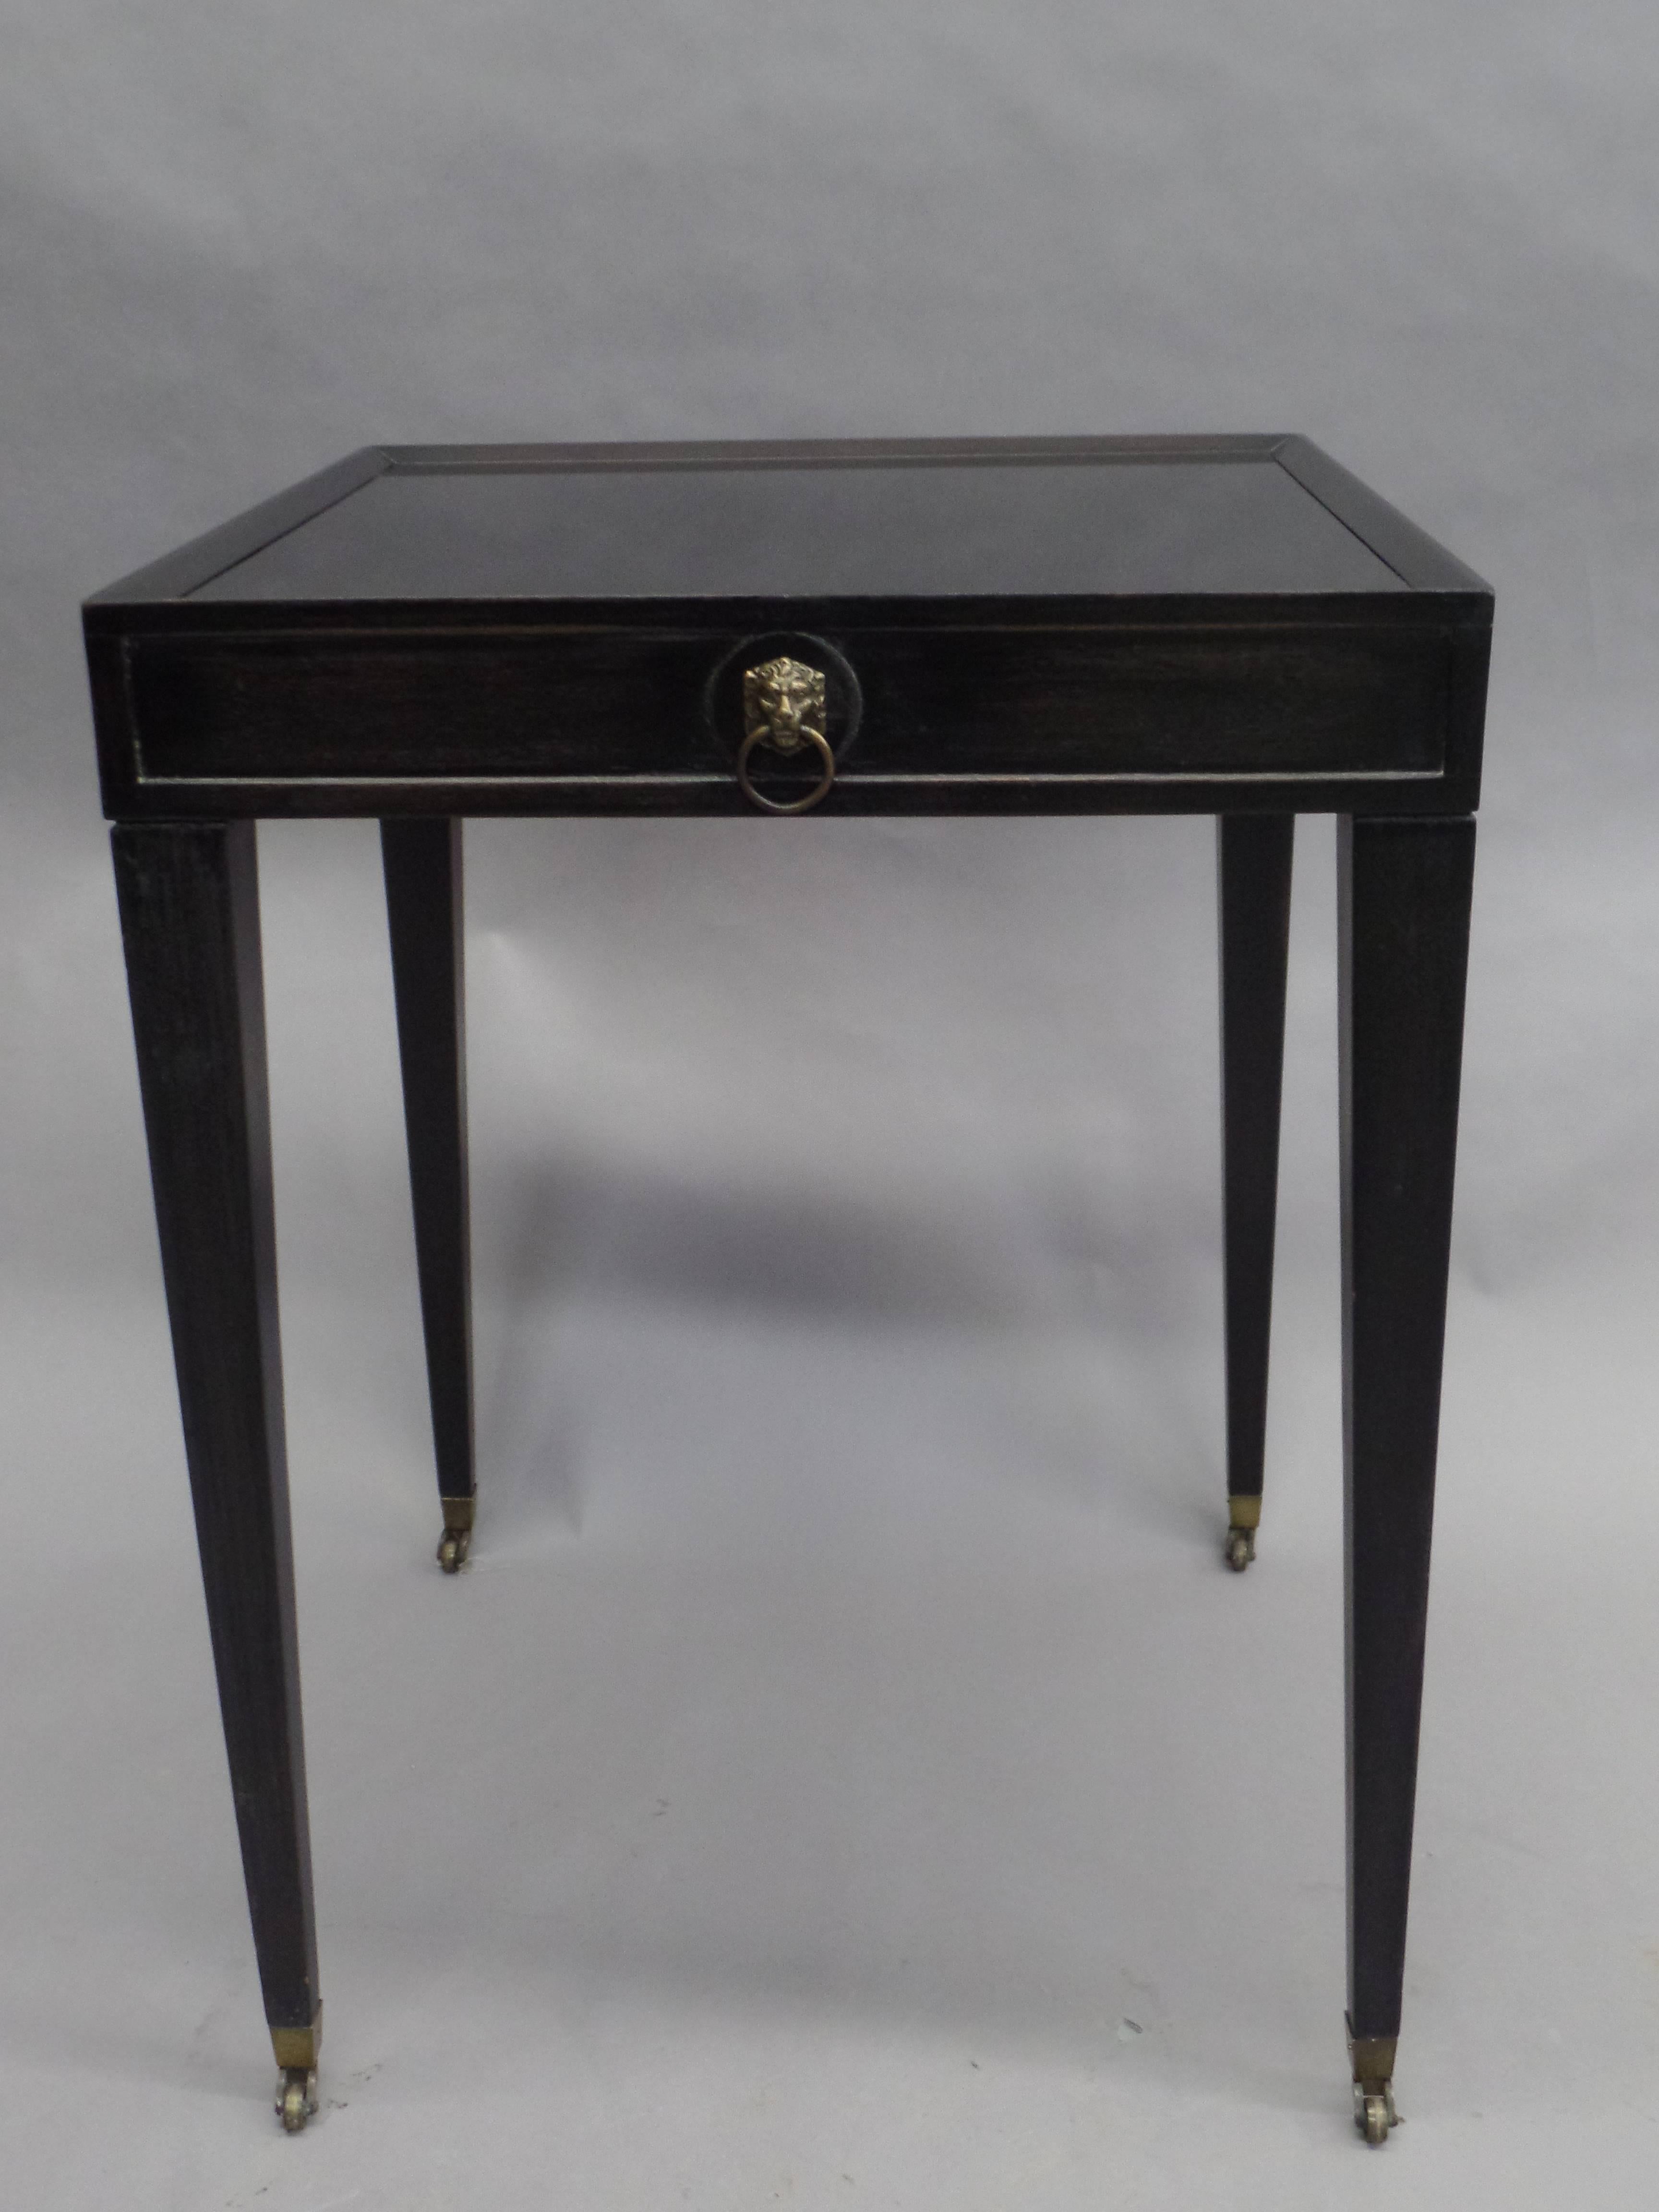 An elegant pair of French Mid-Century ebonized wood end tables / side tables in the modern neoclassical taste with chic tapered legs ending in brass sabots with brass wheels and featuring tops of black 'opaline' glass.

Literature: A similar model